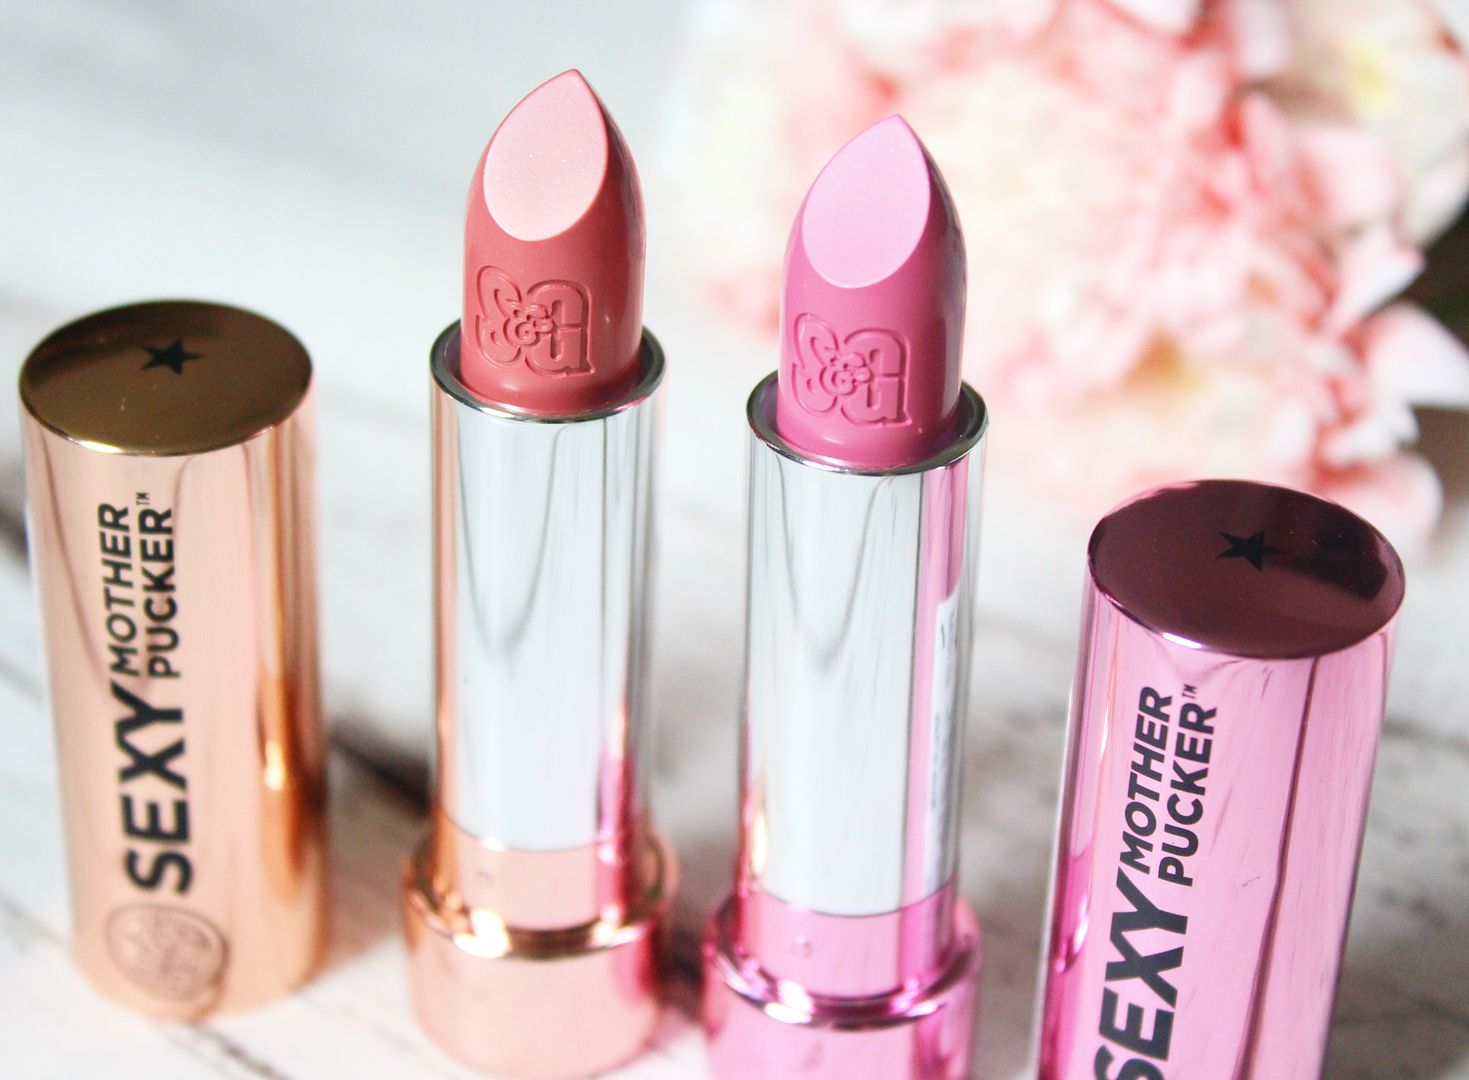 New Soap And Glory Sexy Mother Pucker Lipsticks Nude Pink Naked Talent Pink Up Girl Review Close Up Belle-Amie UK Beauty Fashion Lifestyle Blog